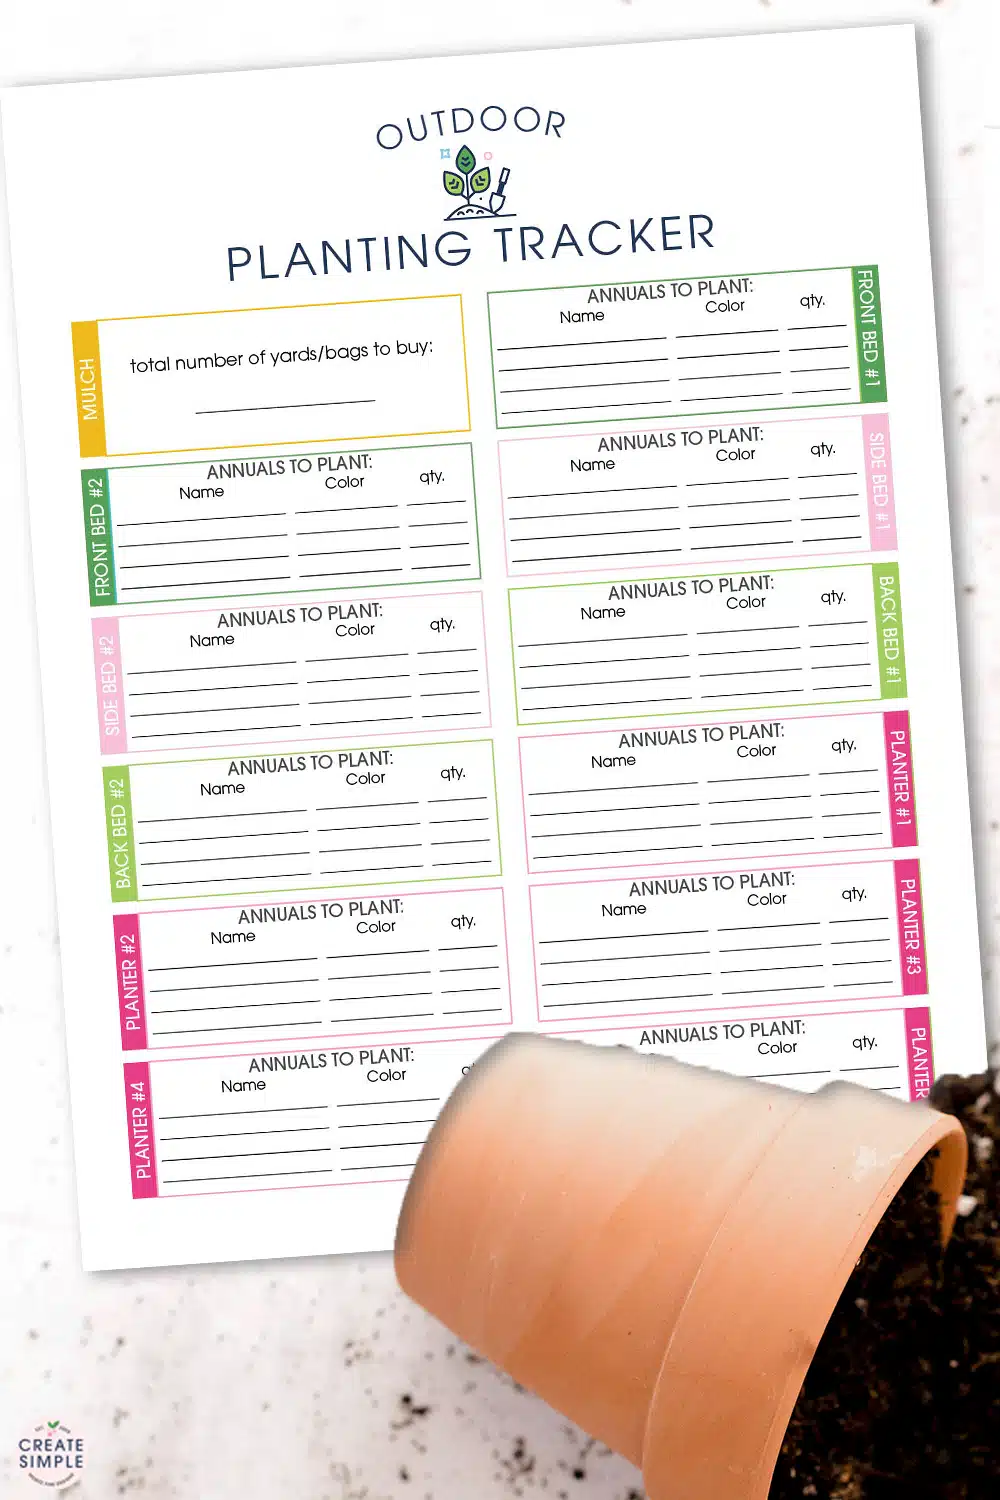 Use the Outdoor Planting Tracker to remember from year to year which plants and how many to buy for your flower beds and garden.